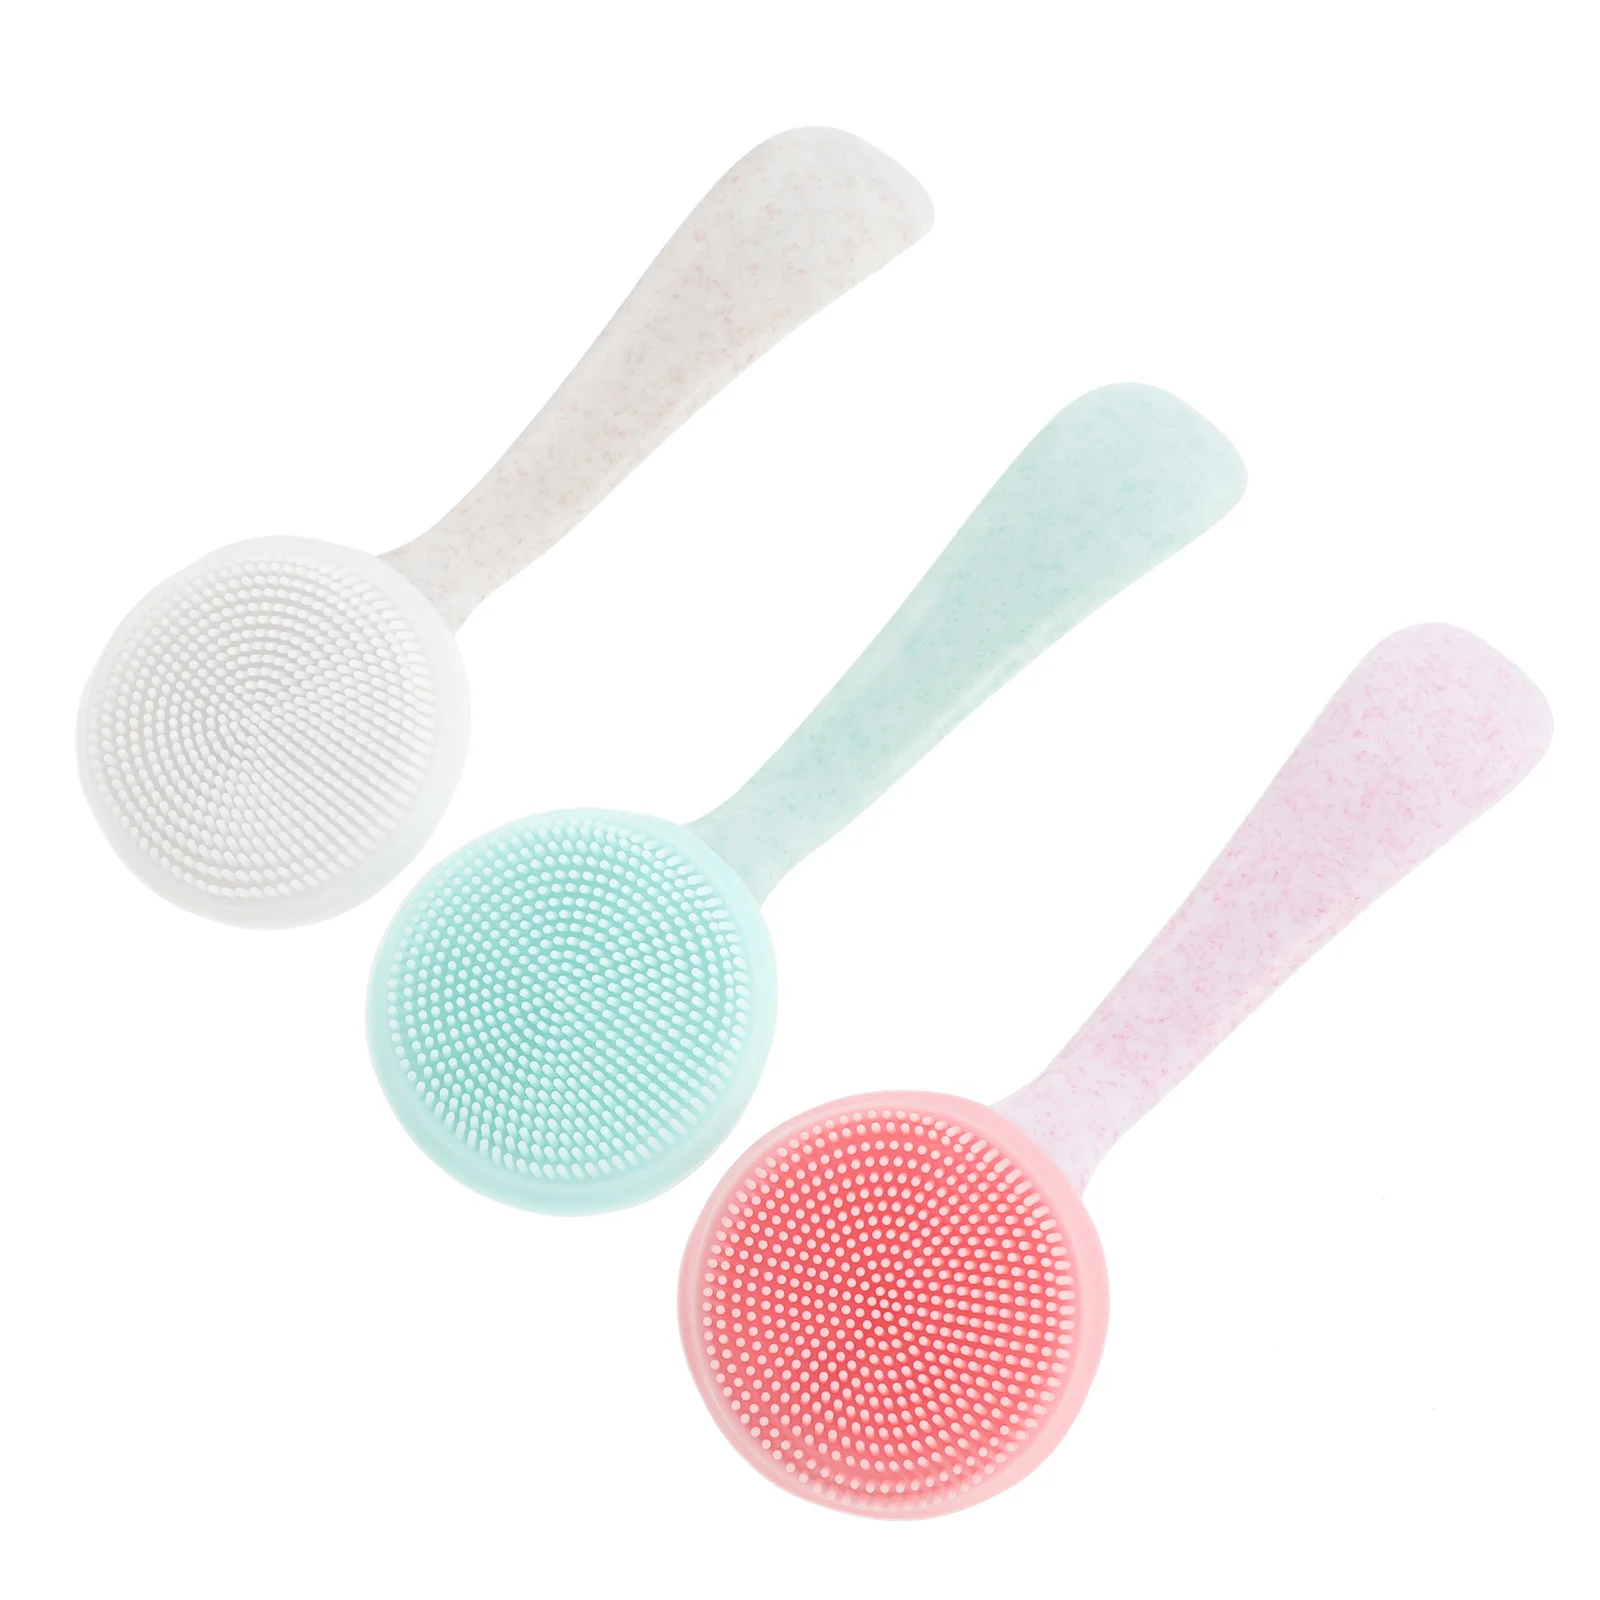 

Brush Face Facial Cleansing Silicone Brushes Manual Cleanser Tool Scrubber Cleaning Applicator Deep Exfoliator Scrub Exfoliating